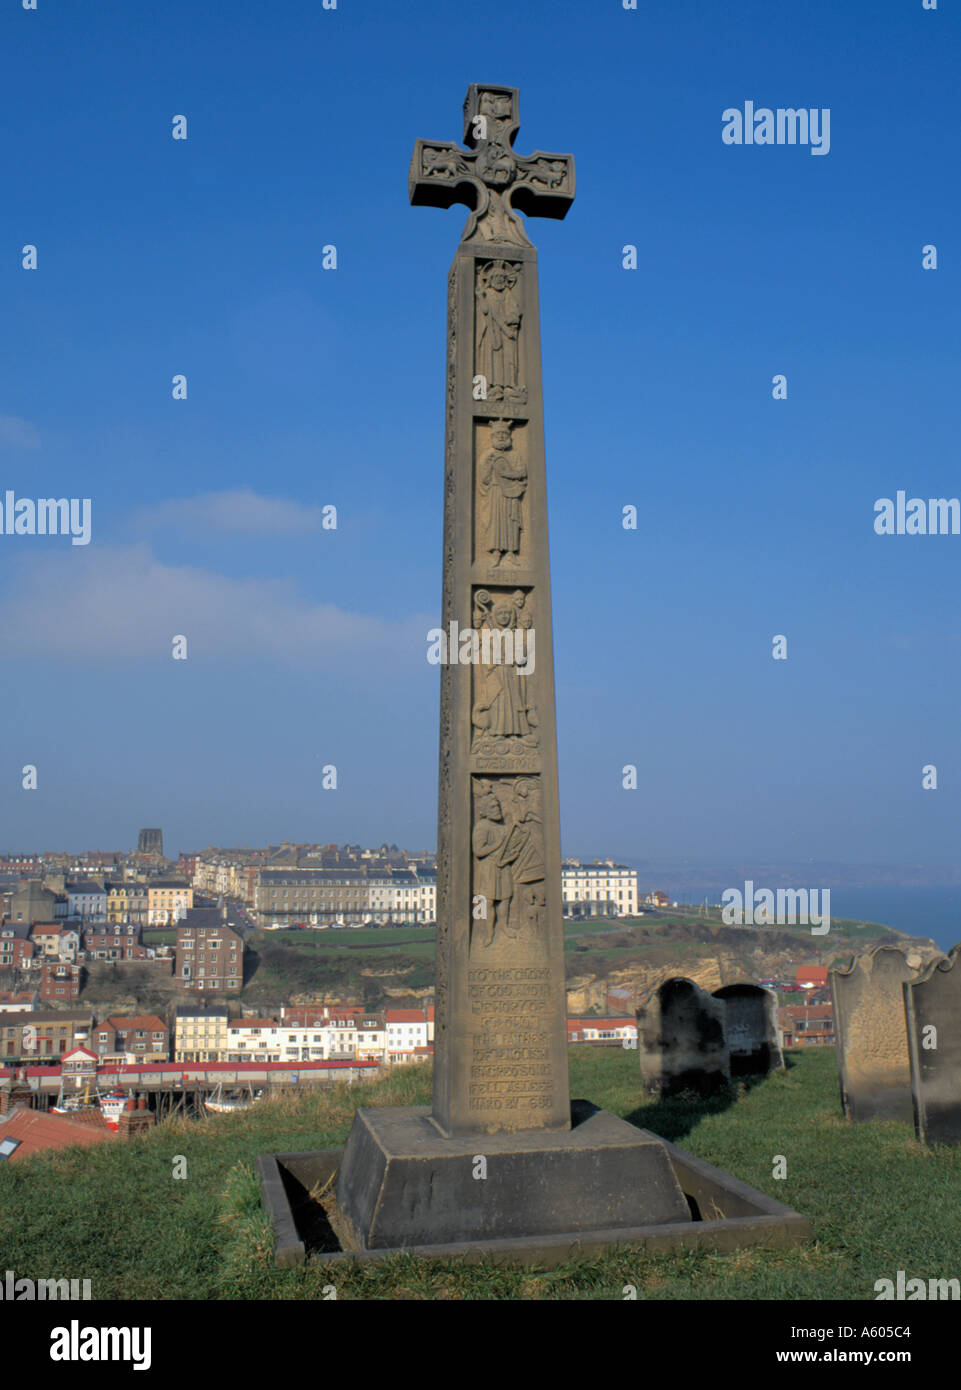 The cross in memory of Caedmon, St Mary's Churchyard, Whitby, North Yorkshire, England, UK. Stock Photo